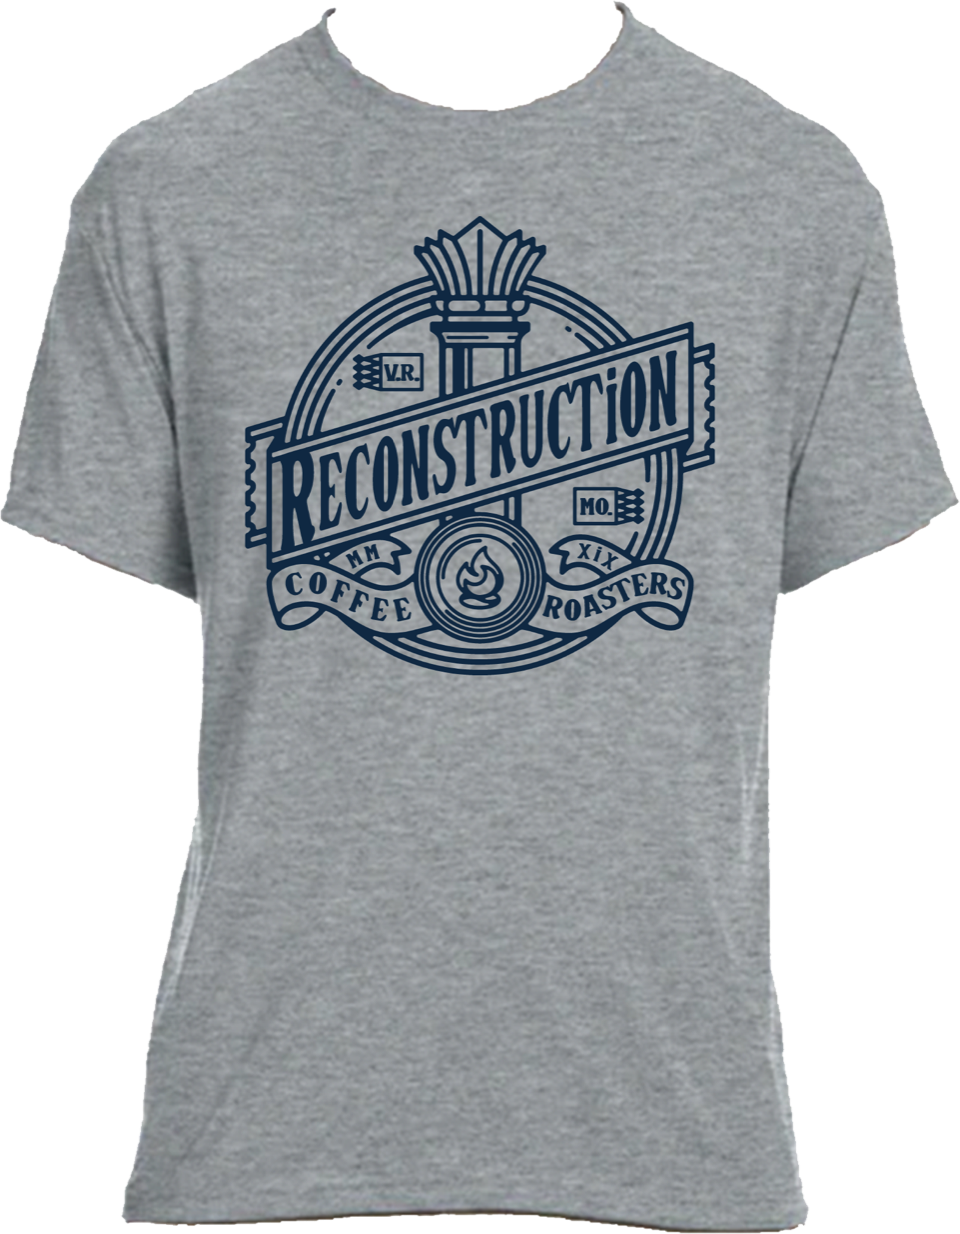 Uni-sex Gray Tee with Blue Reconstruction Coffee Roasters Logo